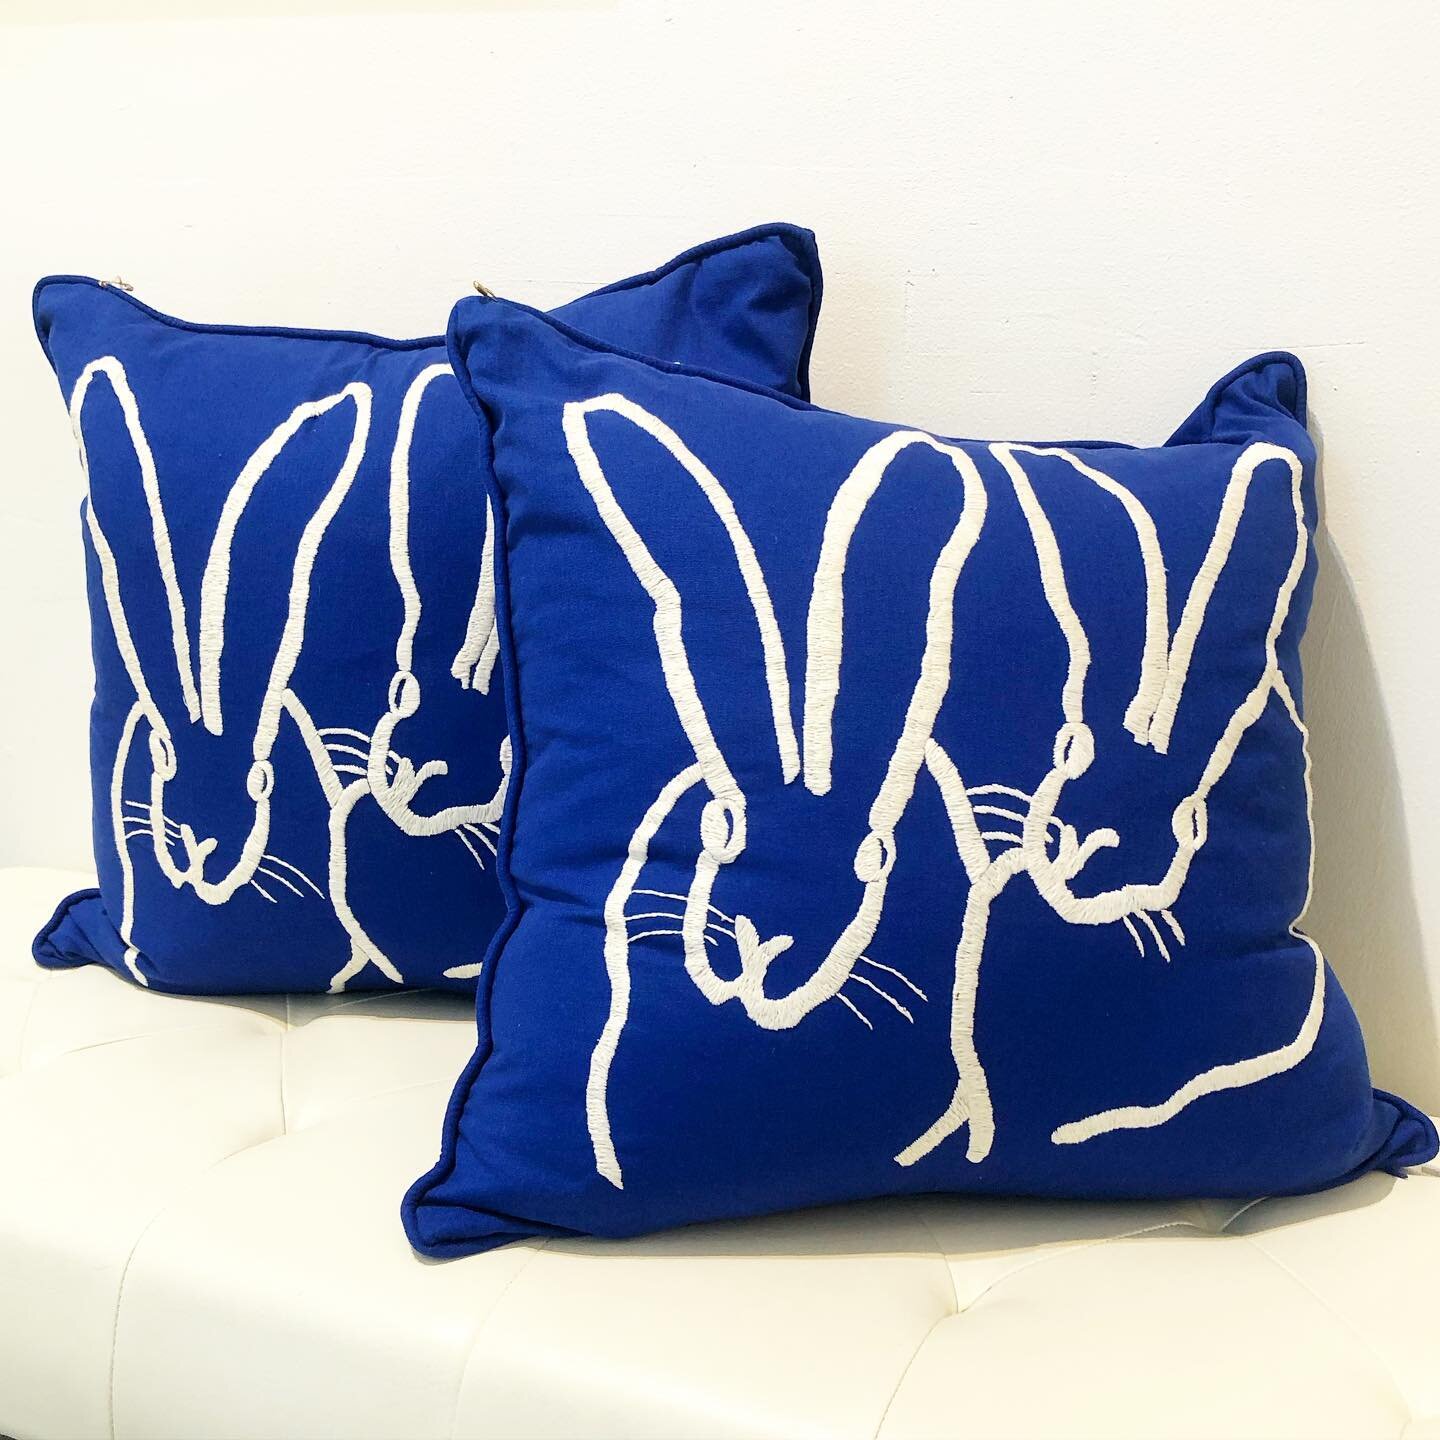 You know it&rsquo;s been a busy day when it&rsquo;s almost 5:00pm and you realize that you haven&rsquo;t posted&hellip; so here&rsquo;s a cheery image to begin and end the day with! Hunt Slonem linen/ embroidered bunny pillows 20&rdquo; x 20&rdquo; (